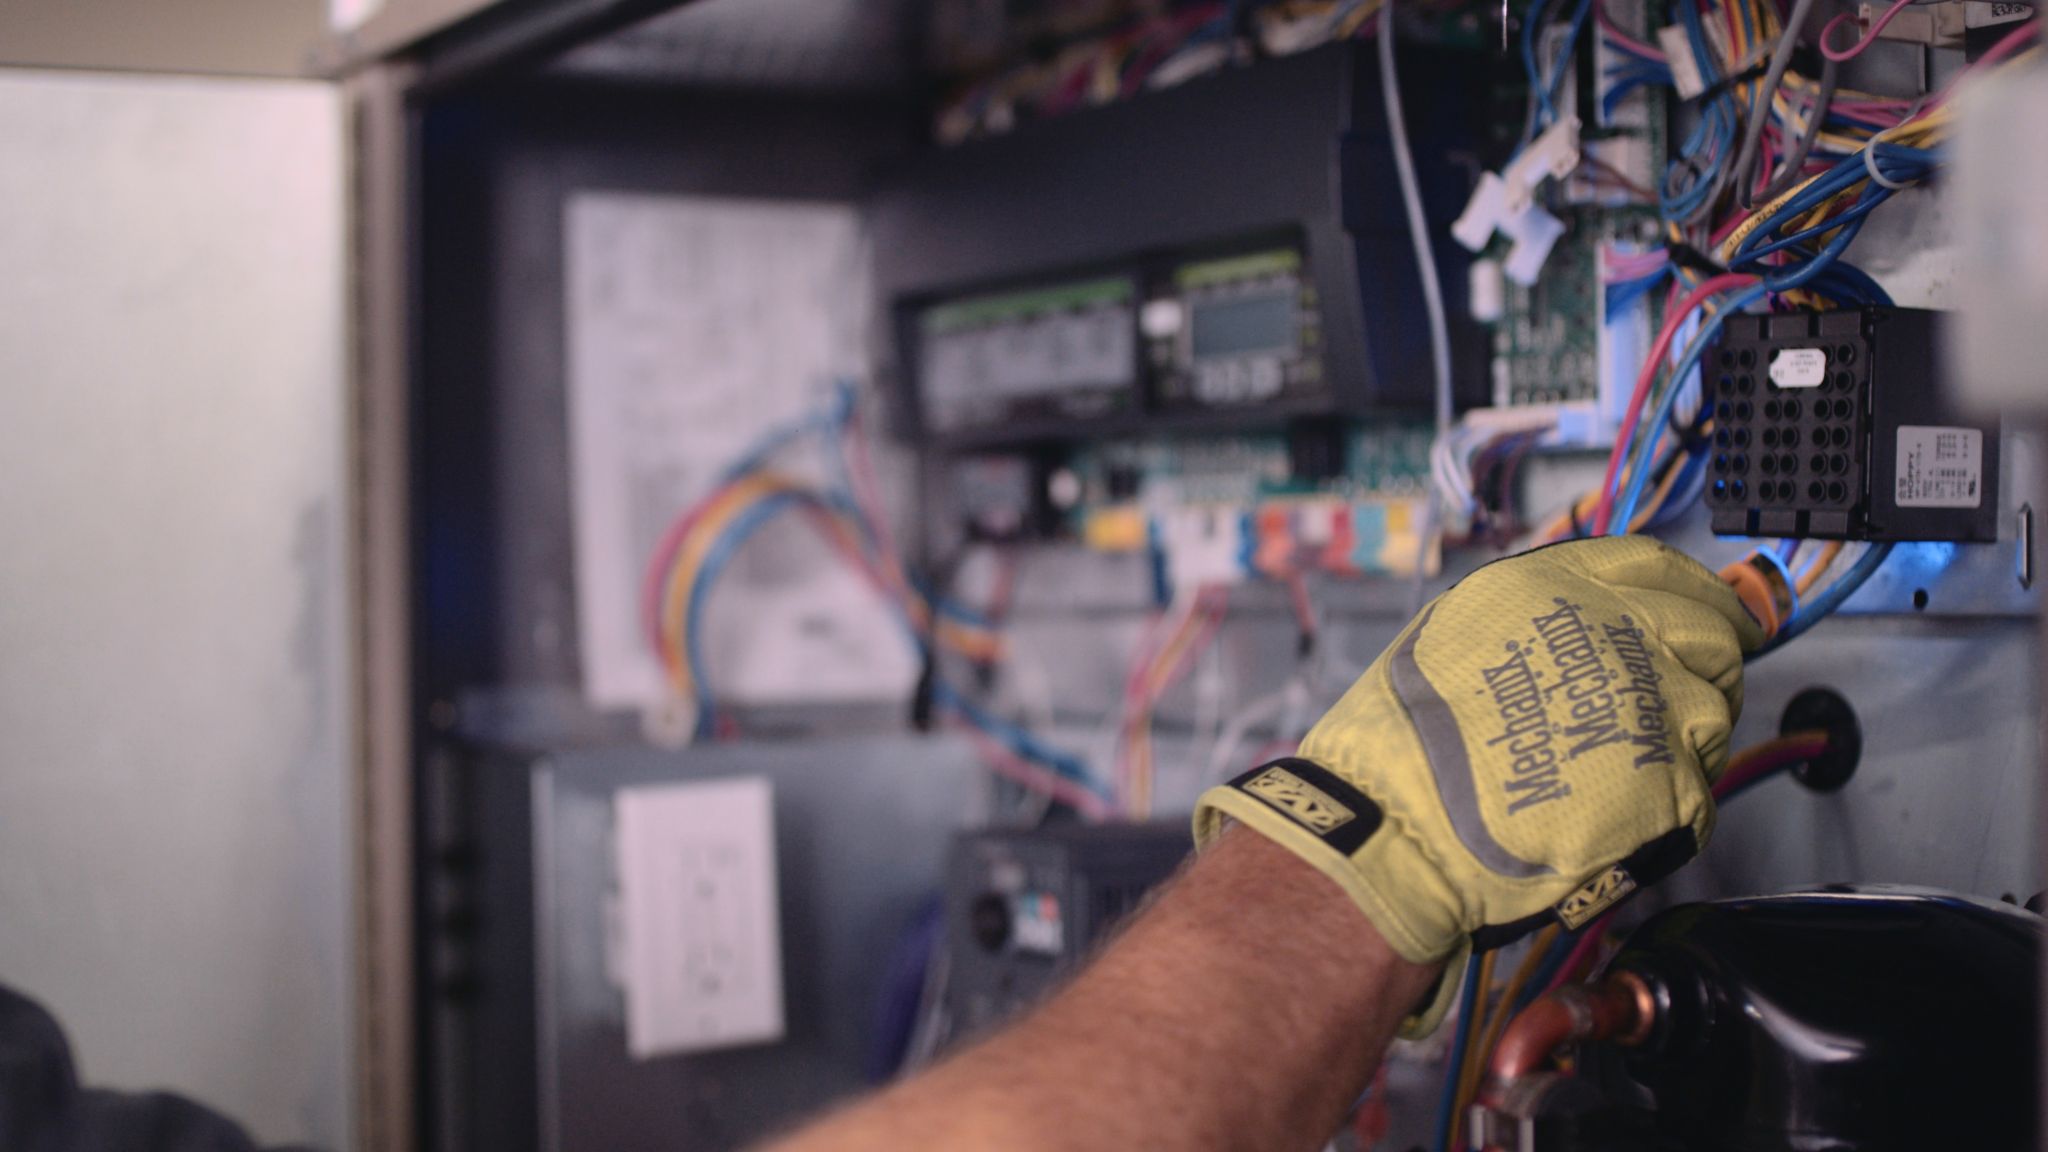 Closeup side profile of a man wearing a yellow glove working with electronics in a container